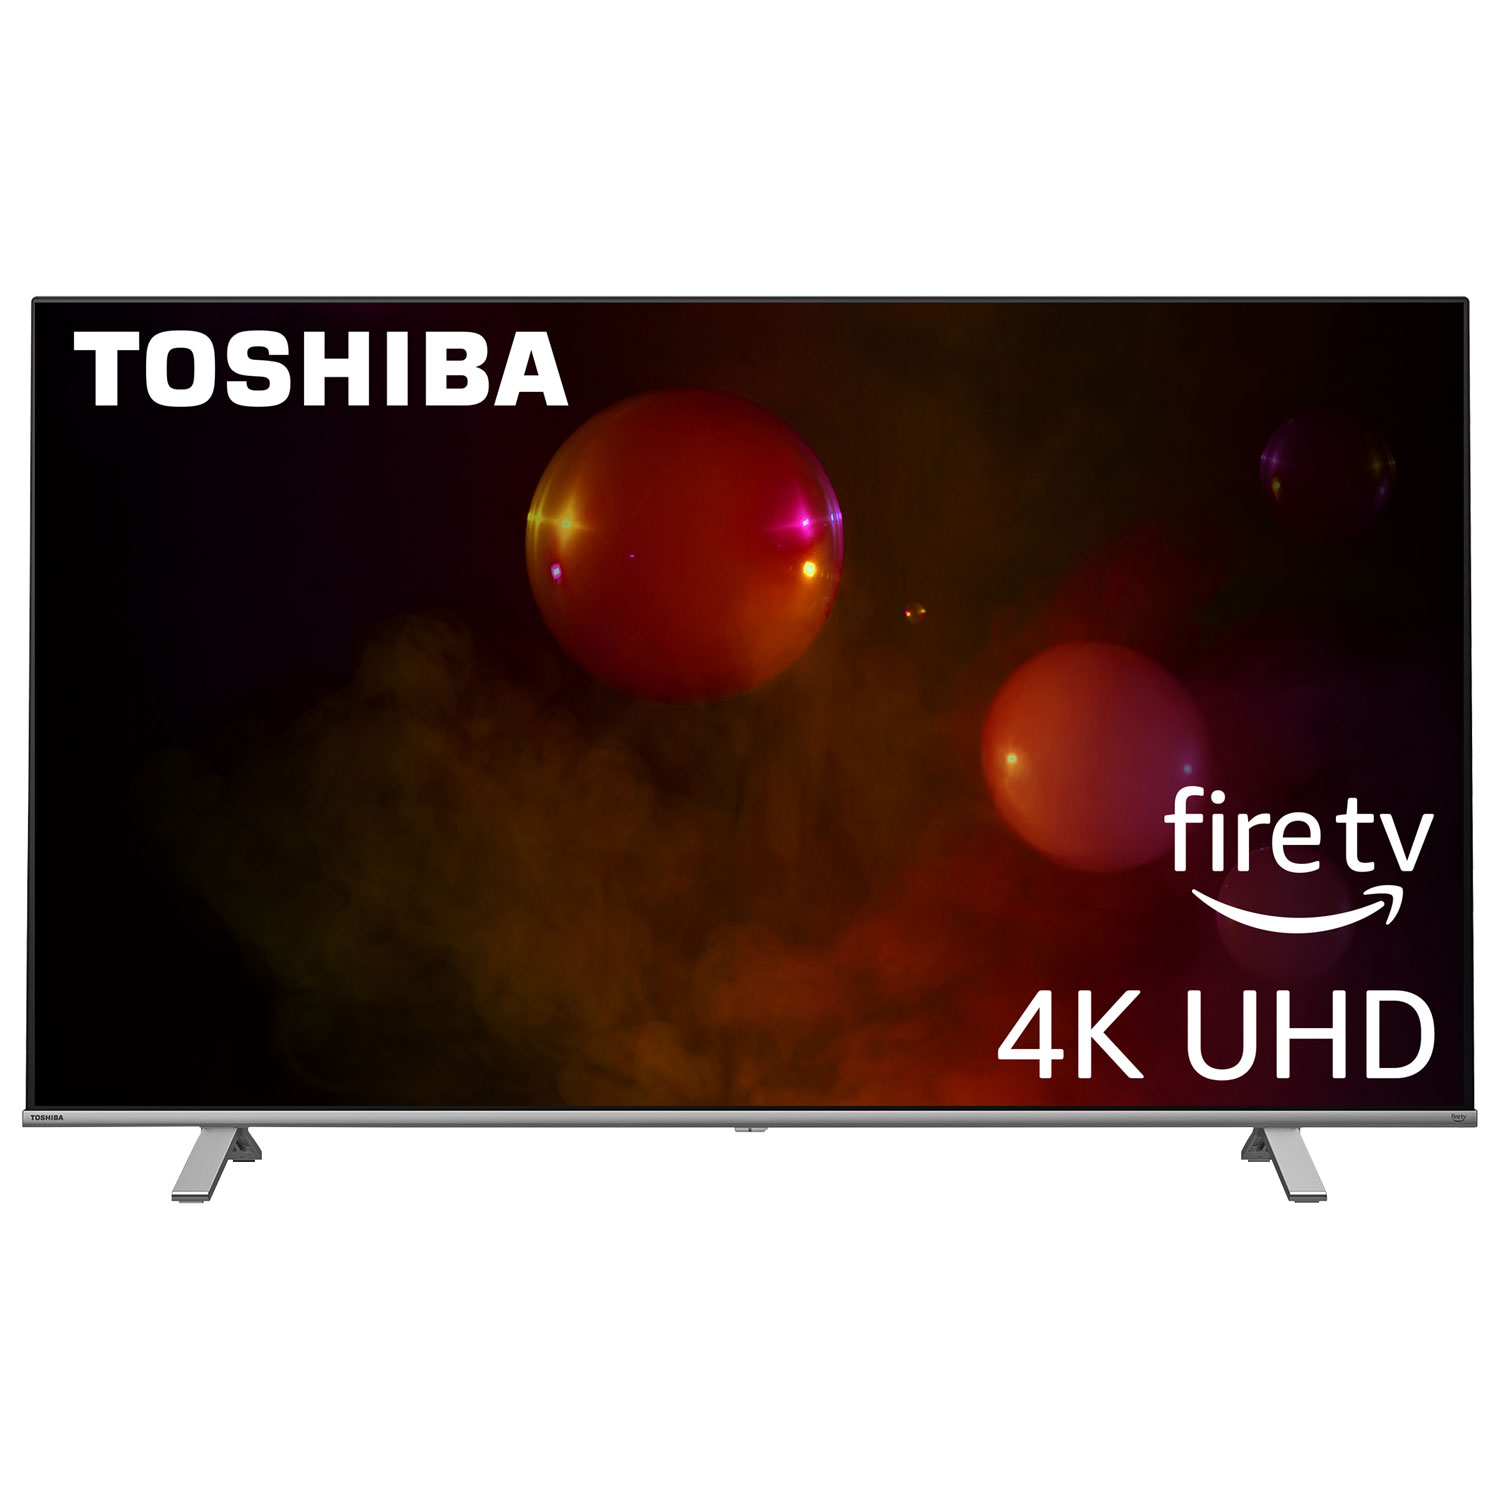 Toshiba 43" 4K UHD HDR LED Smart TV (43C350KC) - Fire TV Edition - 2021 - Only at Best Buy